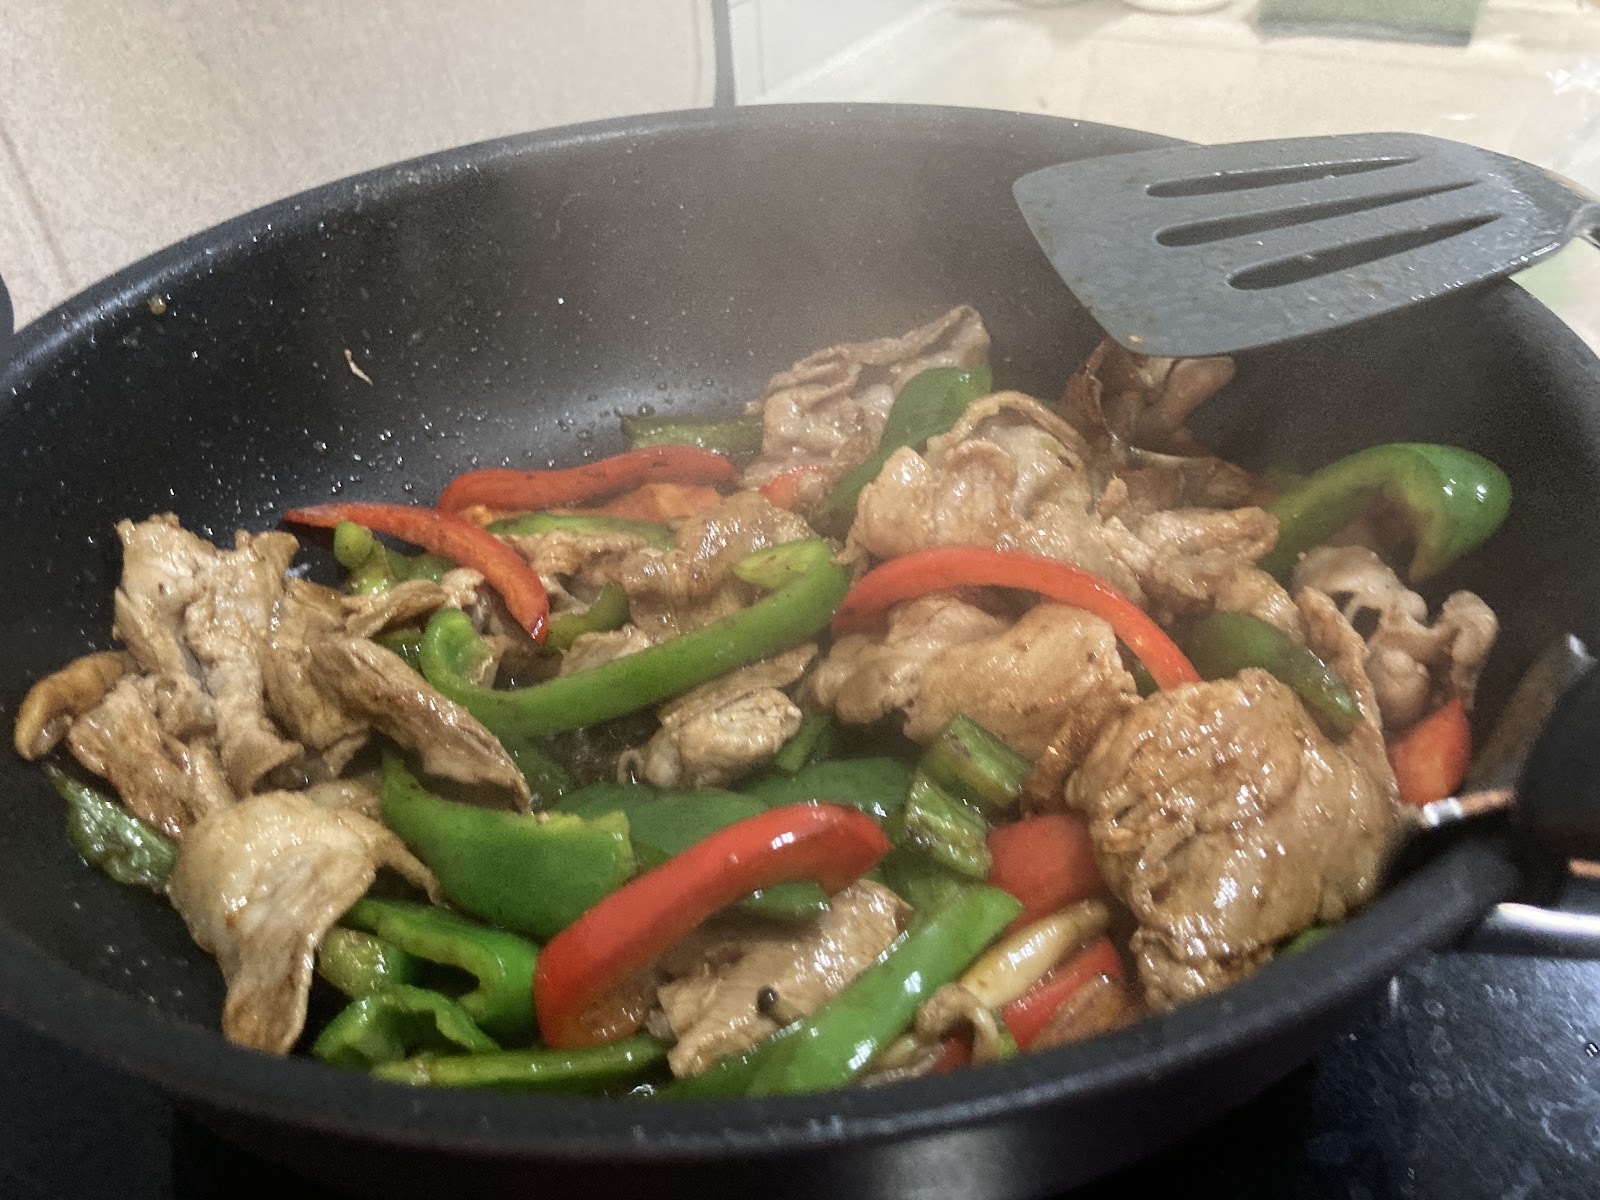 Pork and Peppers Stir Fry